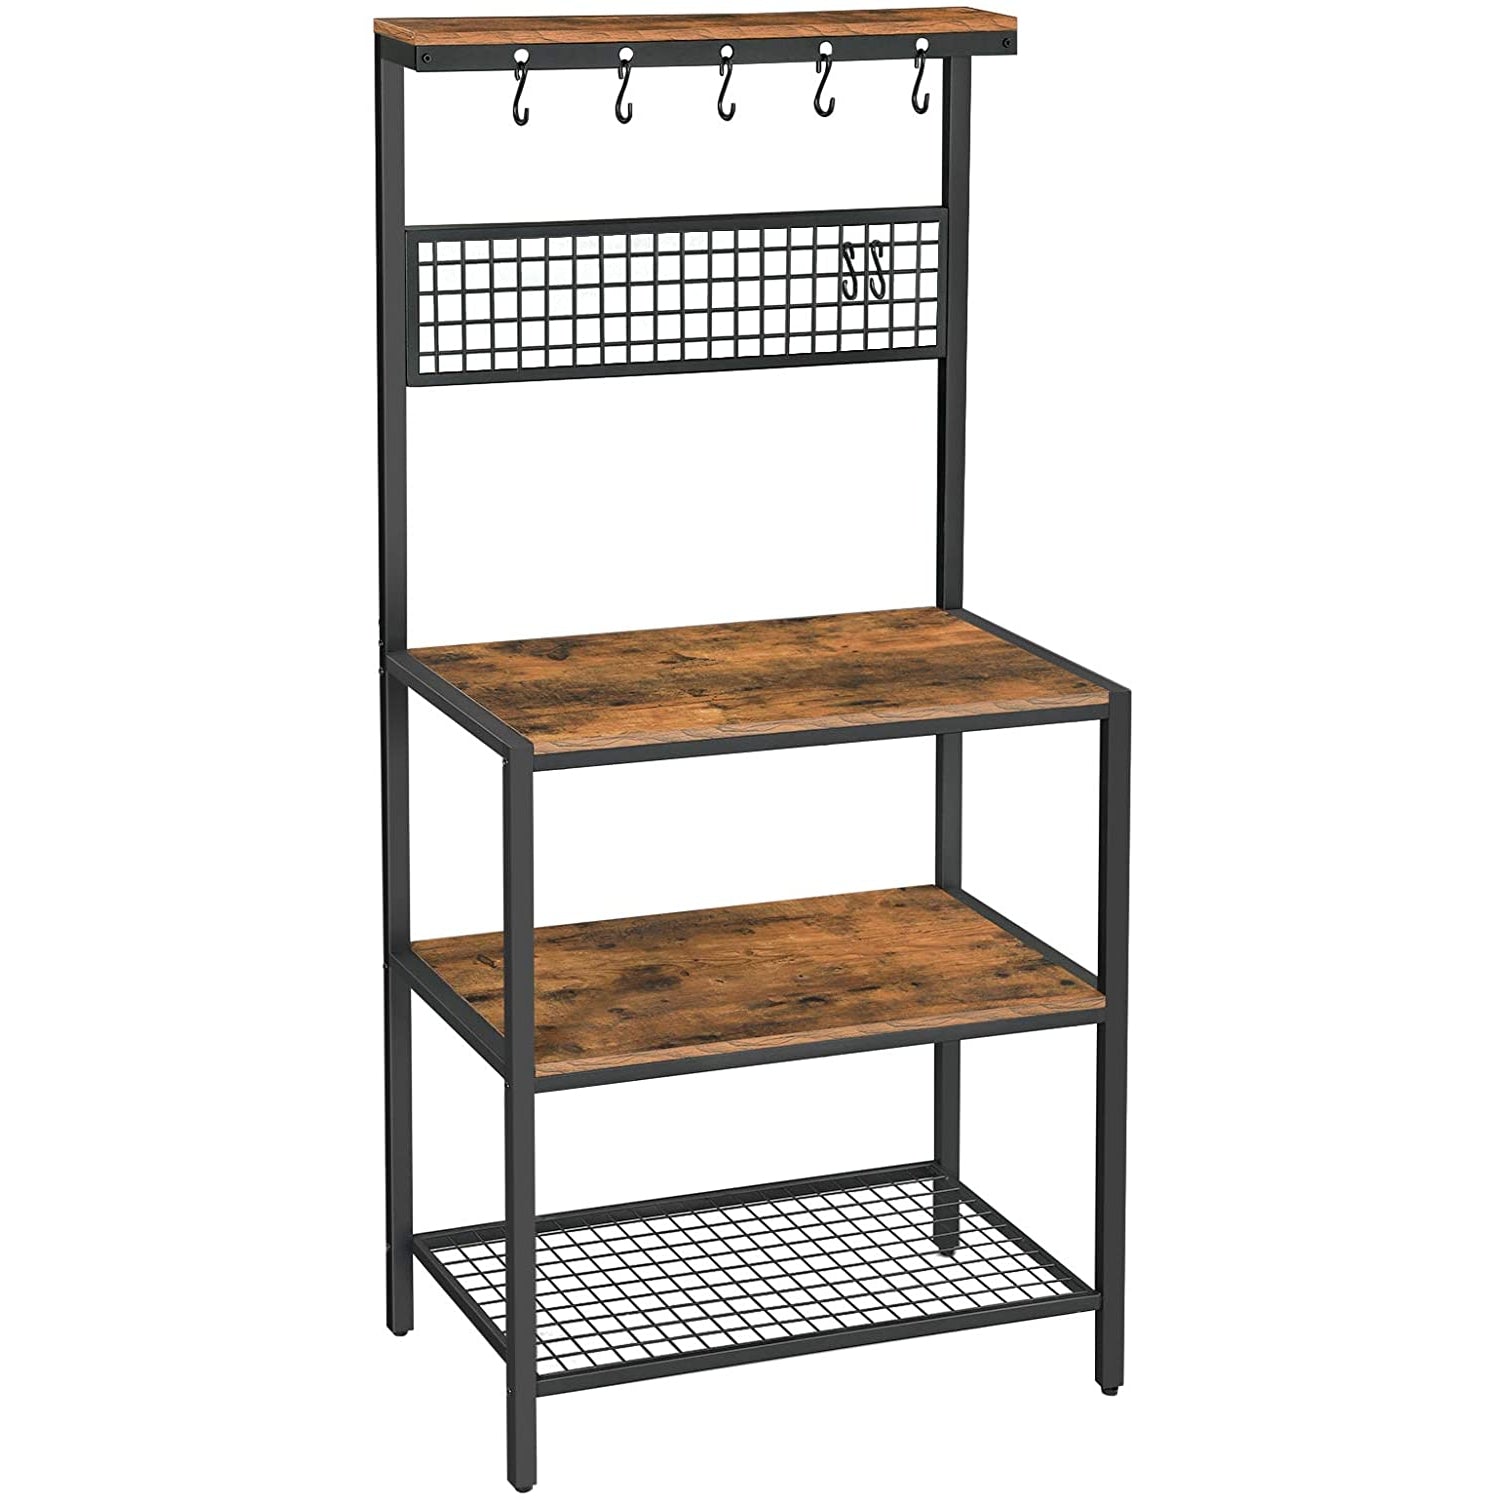 Nancy's Gordons Kitchen Cabinet - Kitchen Rack - Kitchen Cabinets - Standing Rack with Hooks and Shelves - 84 x 40 x 170 cm